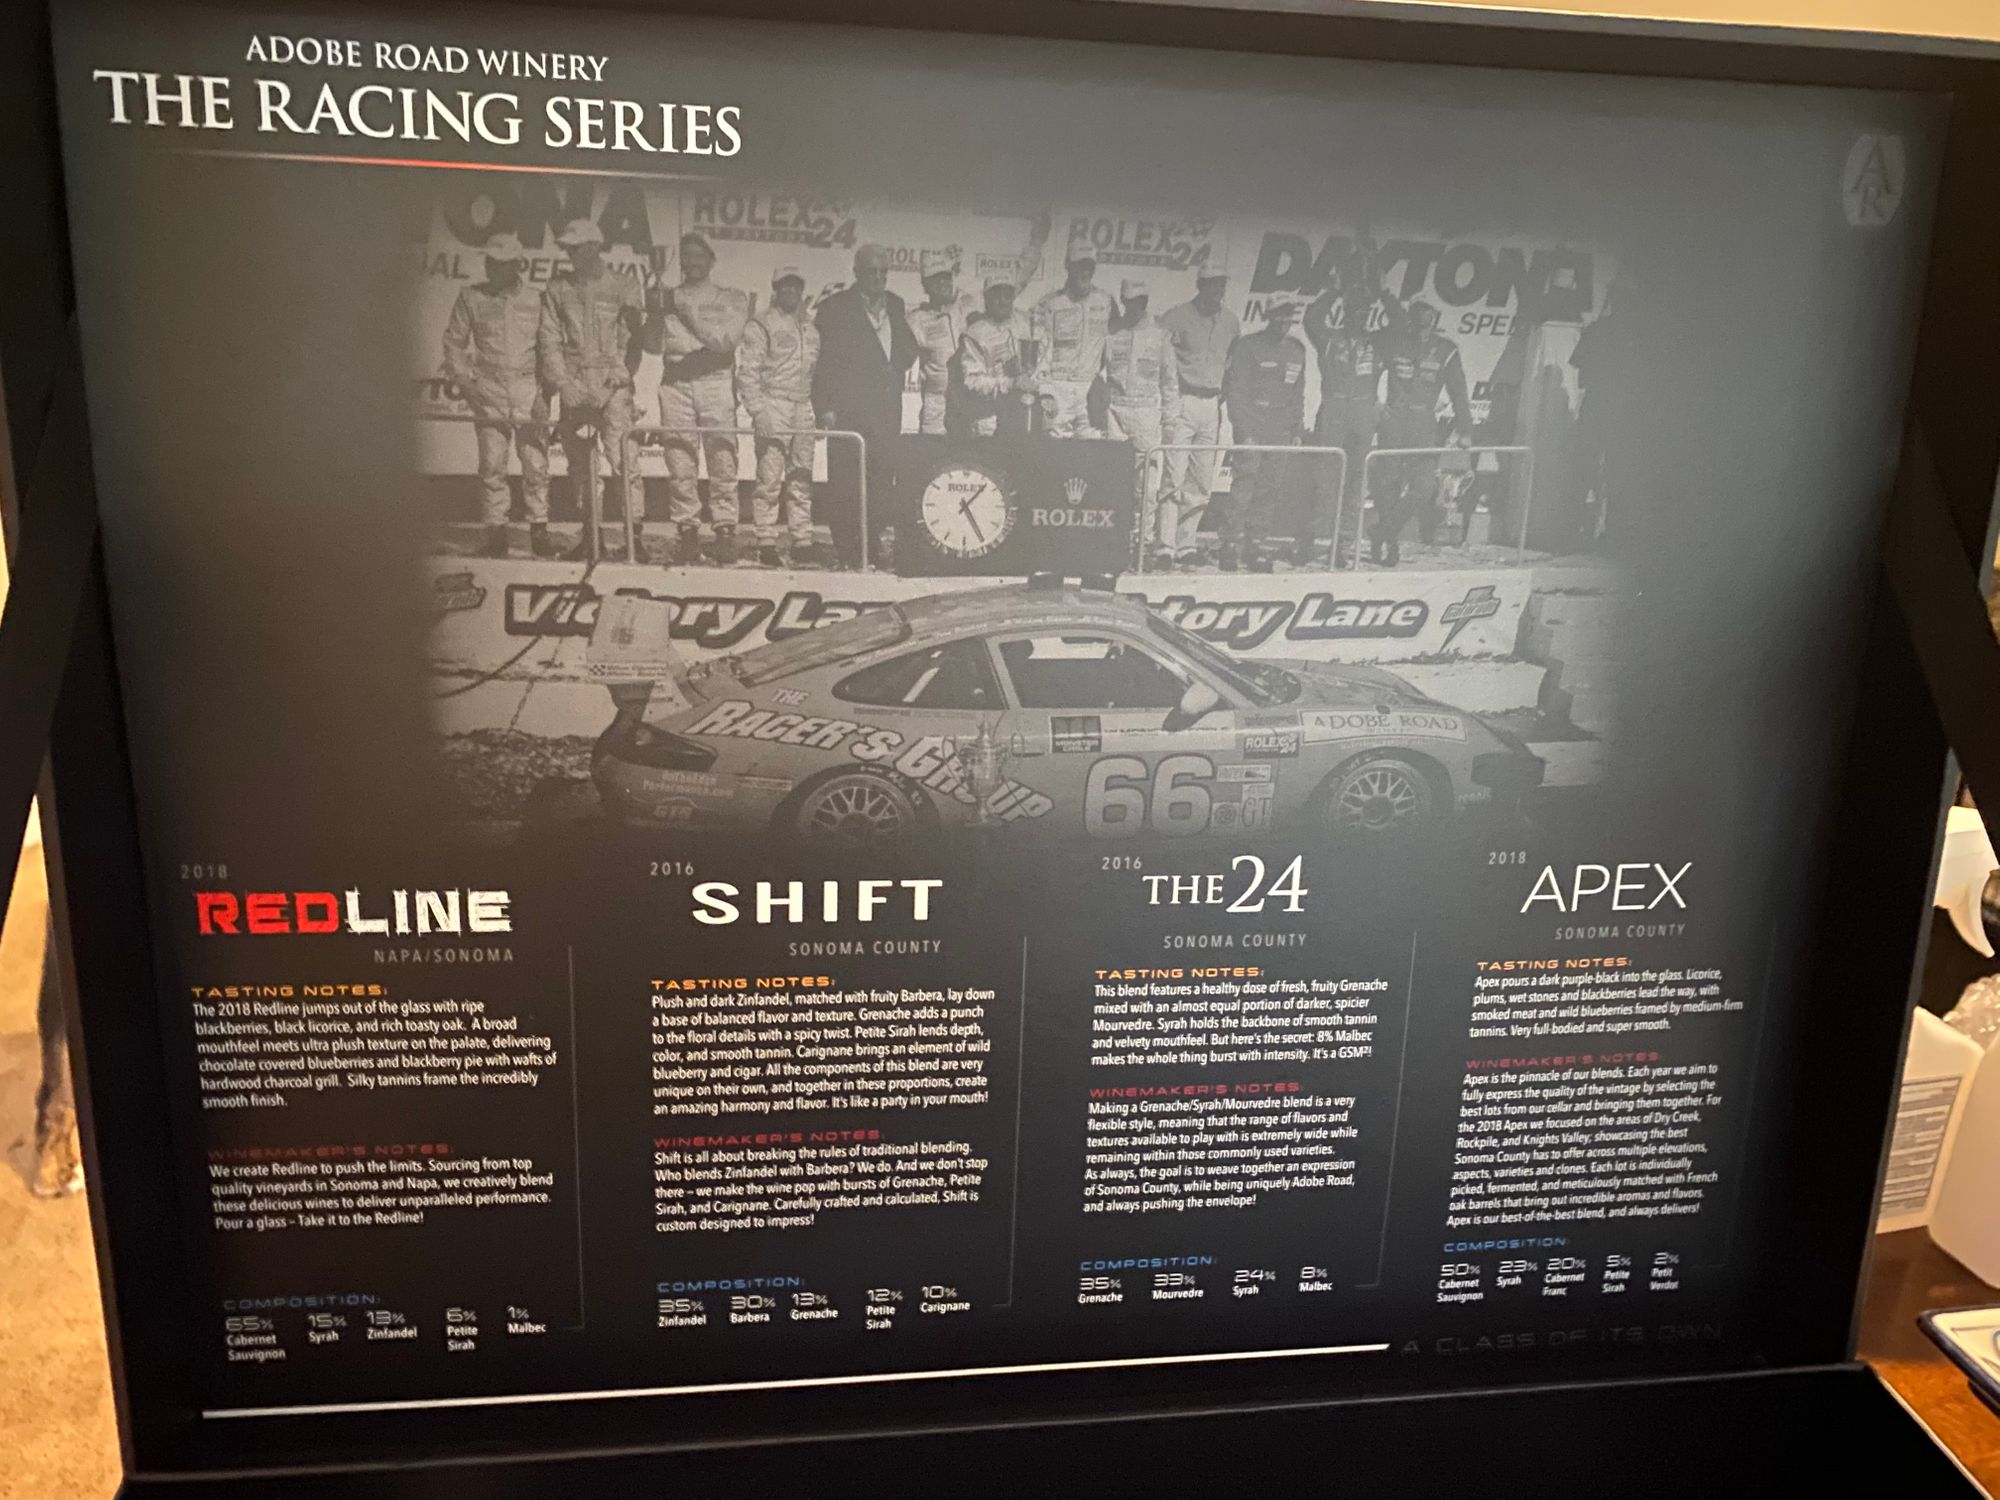 Learn More About The Racing Series Wines 